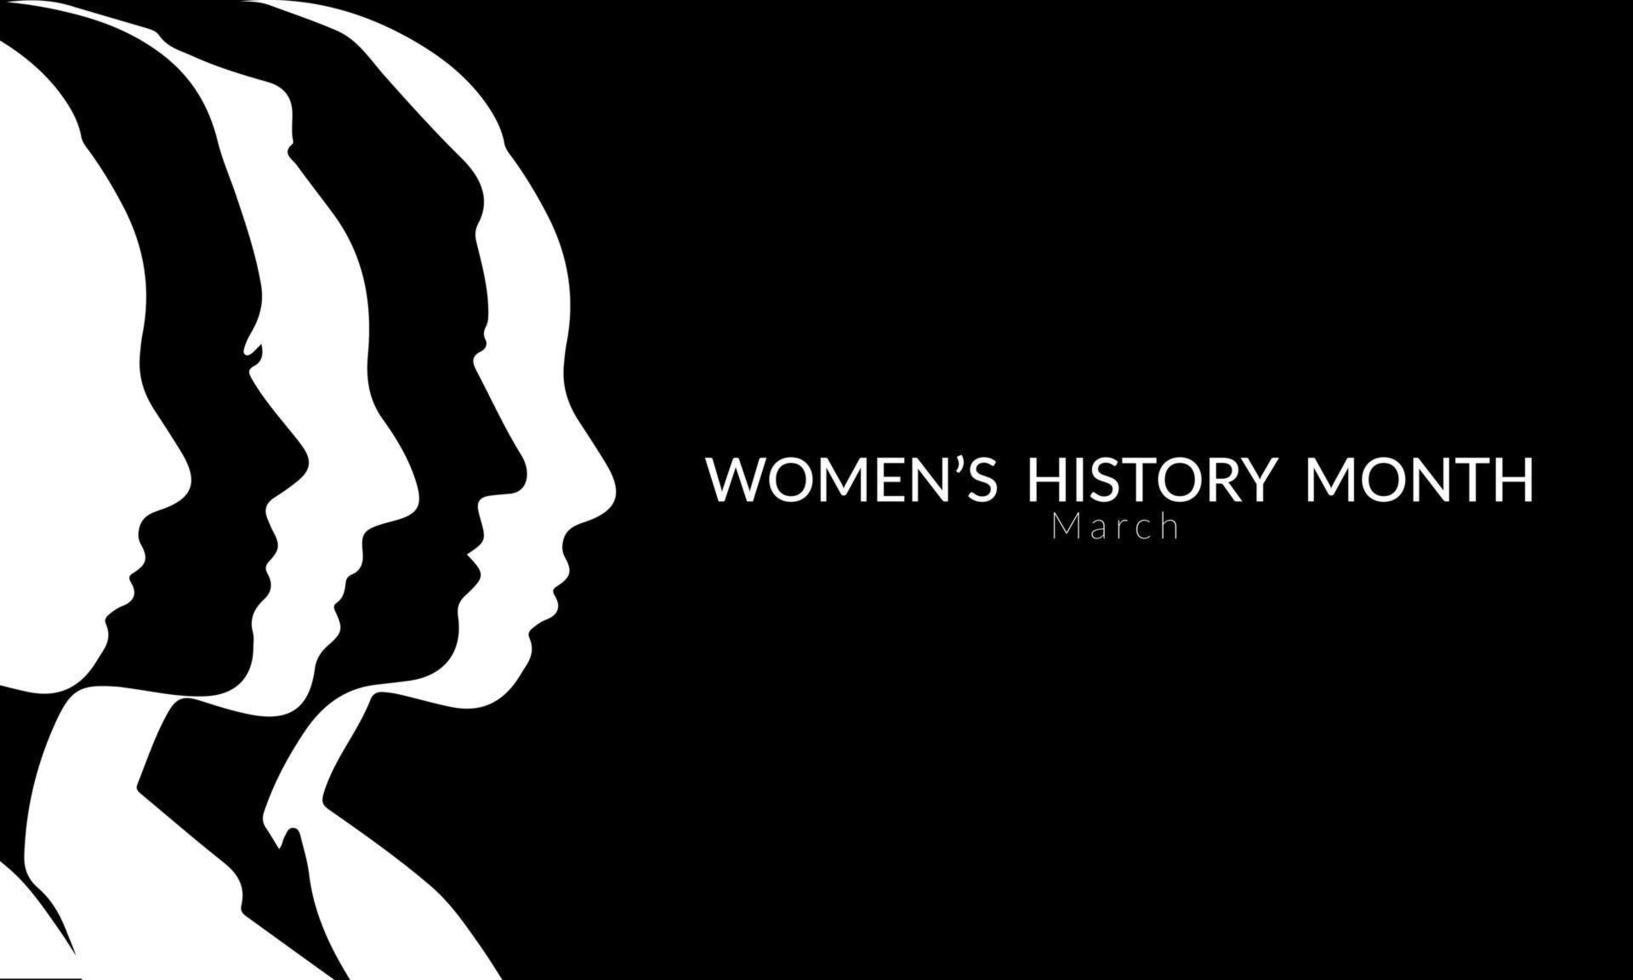 Women's History month banner in black and white color vector